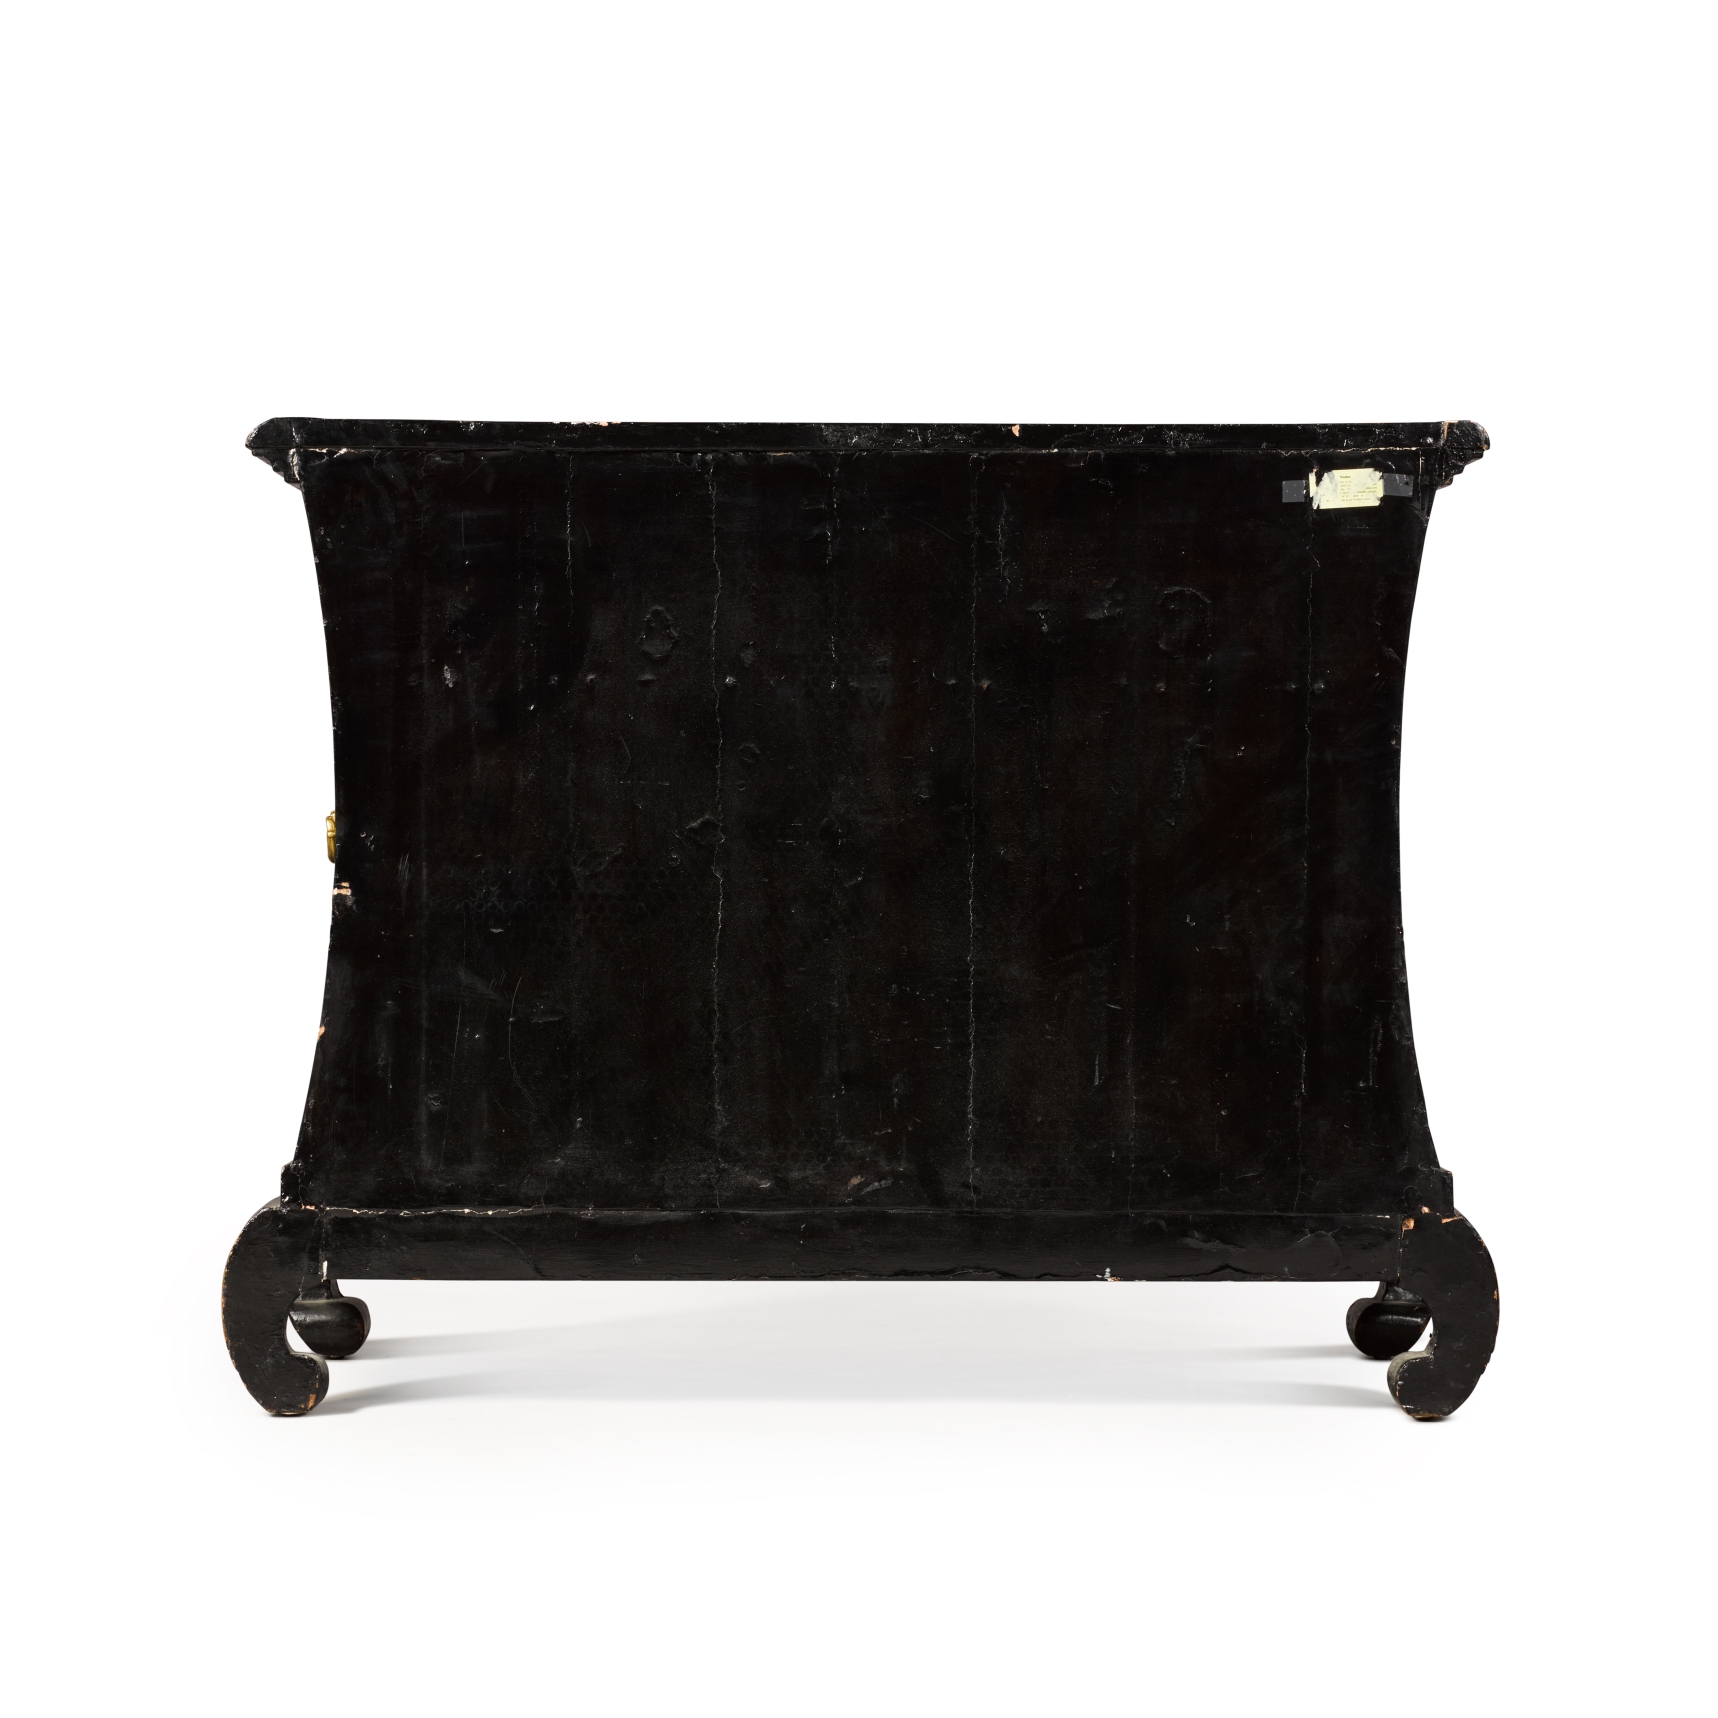 A Chinese export black gilt and polychrome lacquer commode, mid-18th century - Image 4 of 6